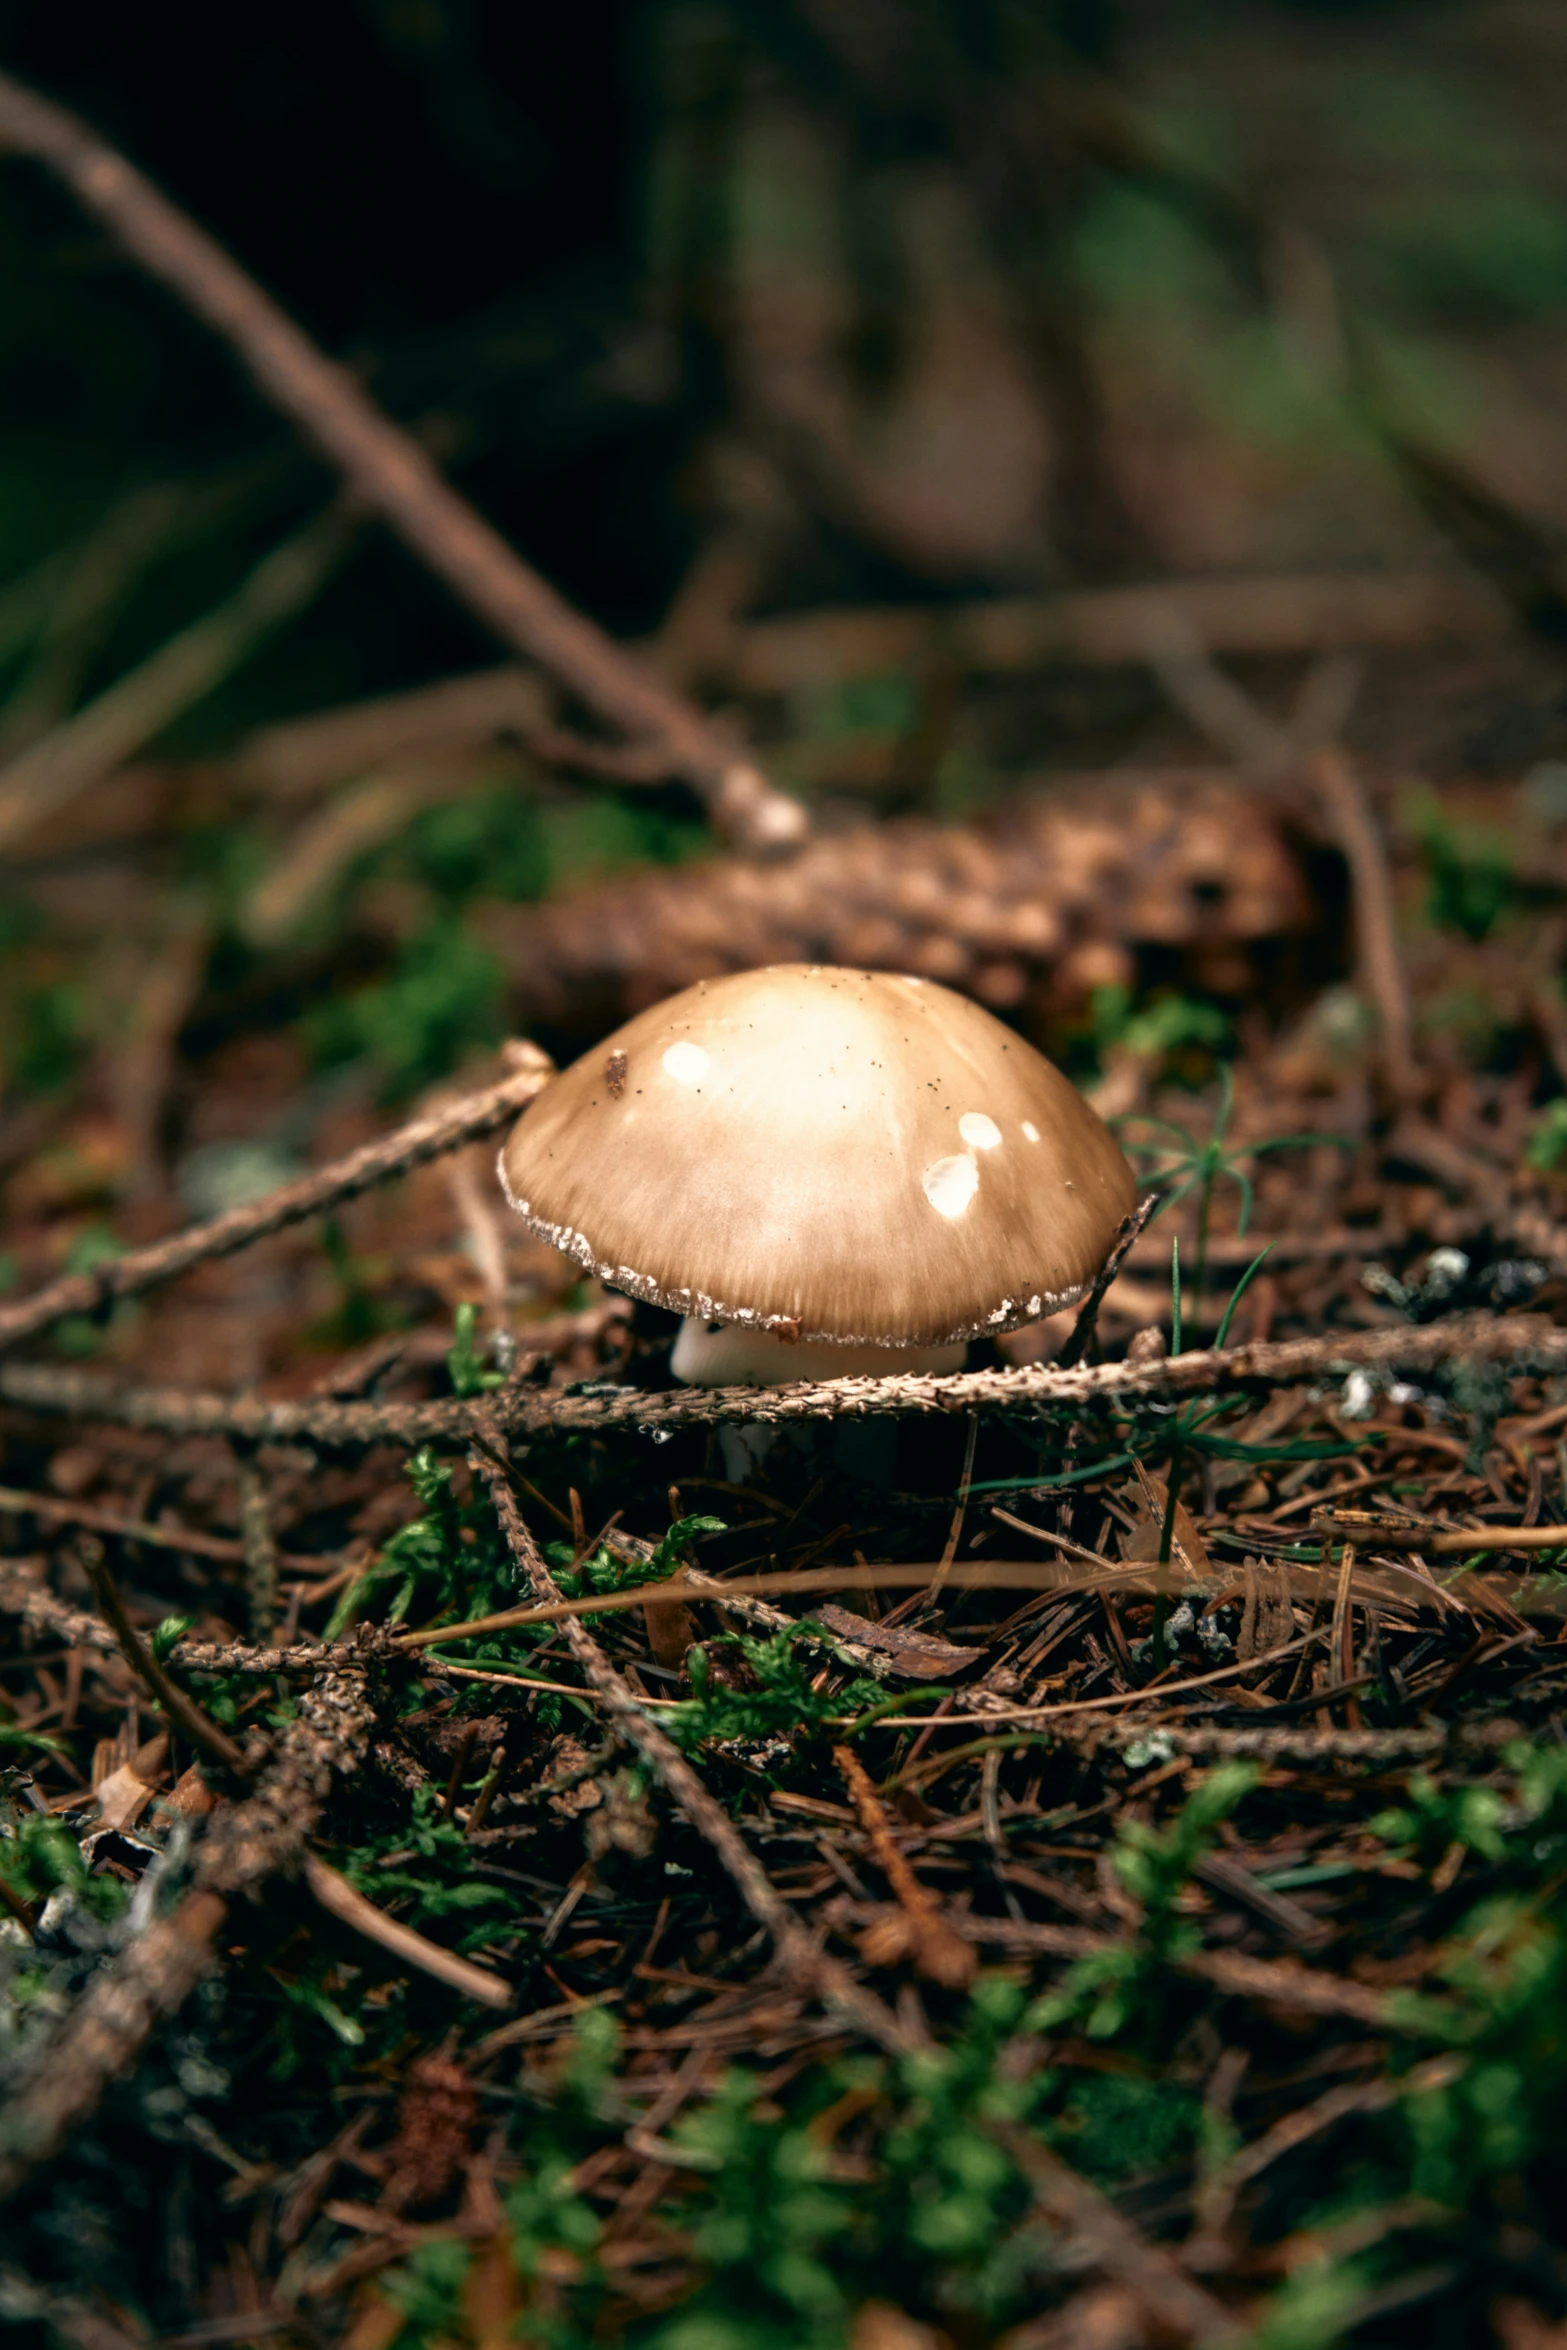 a mushroom grows on the ground, surrounded by needles